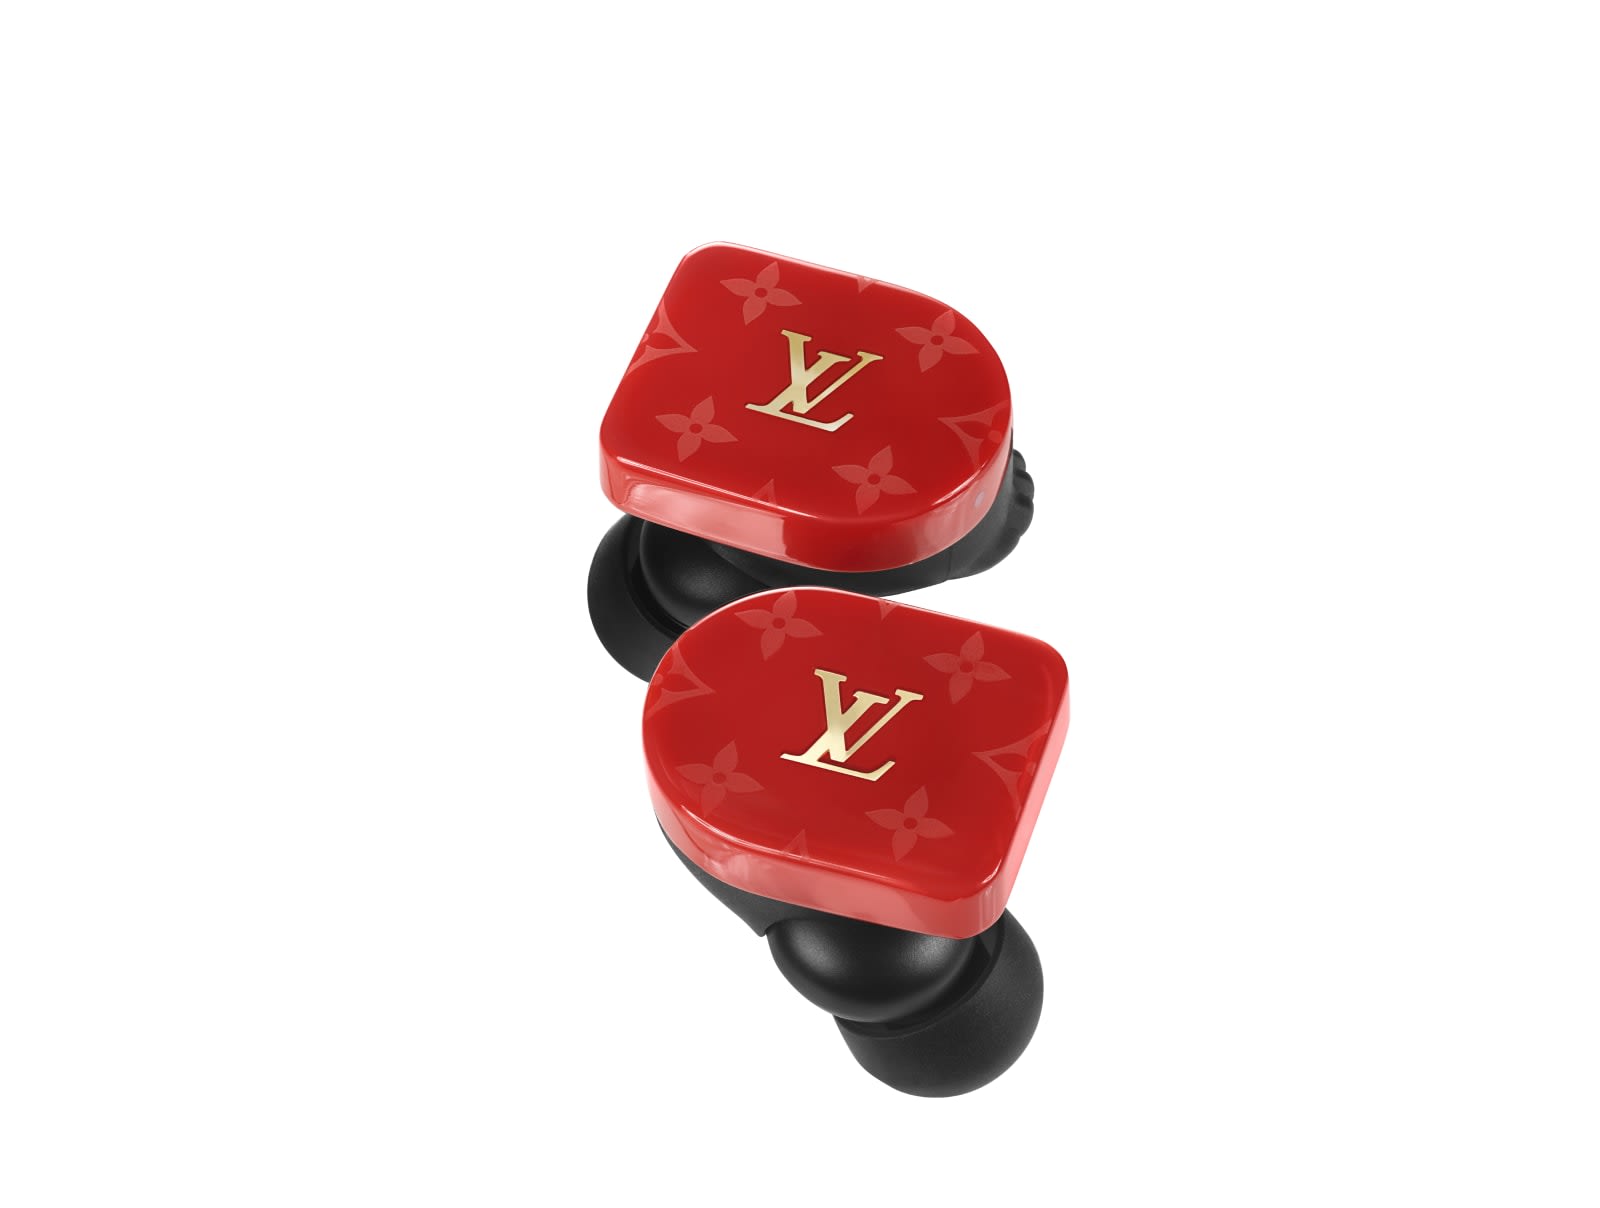 Louis Vuitton wireless earbuds will cost you almost $1,000